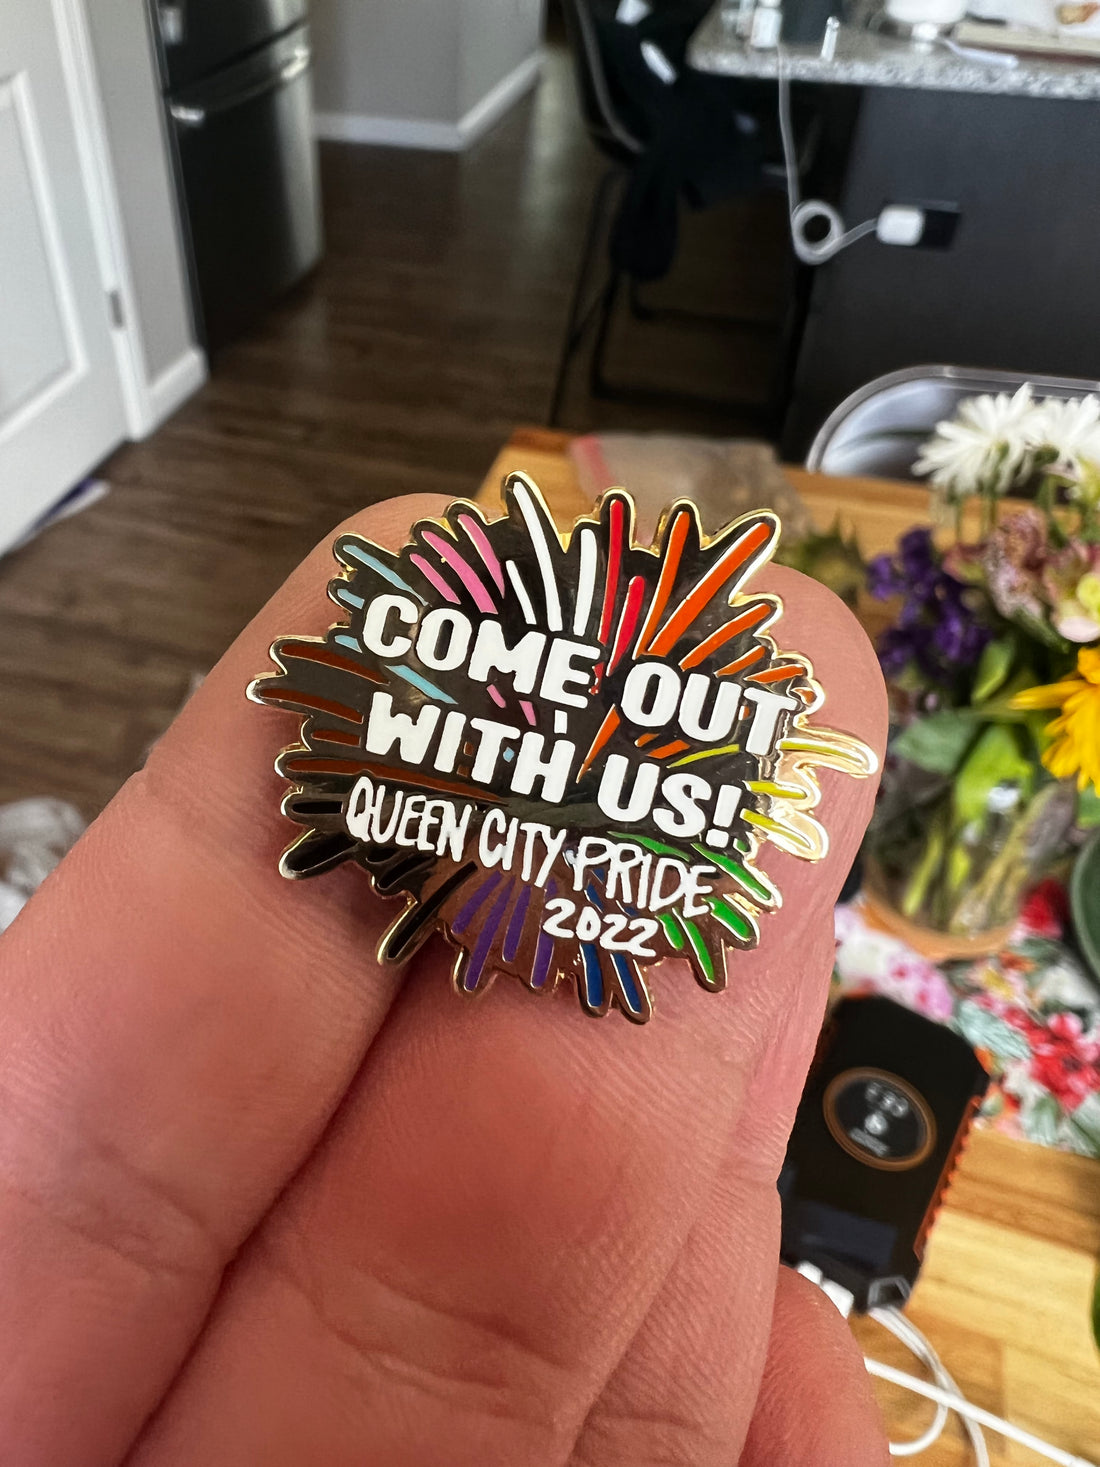 "COME OUT WITH US!" LOGO DESIGN FOR QUEEN CITY PRIDE 2022